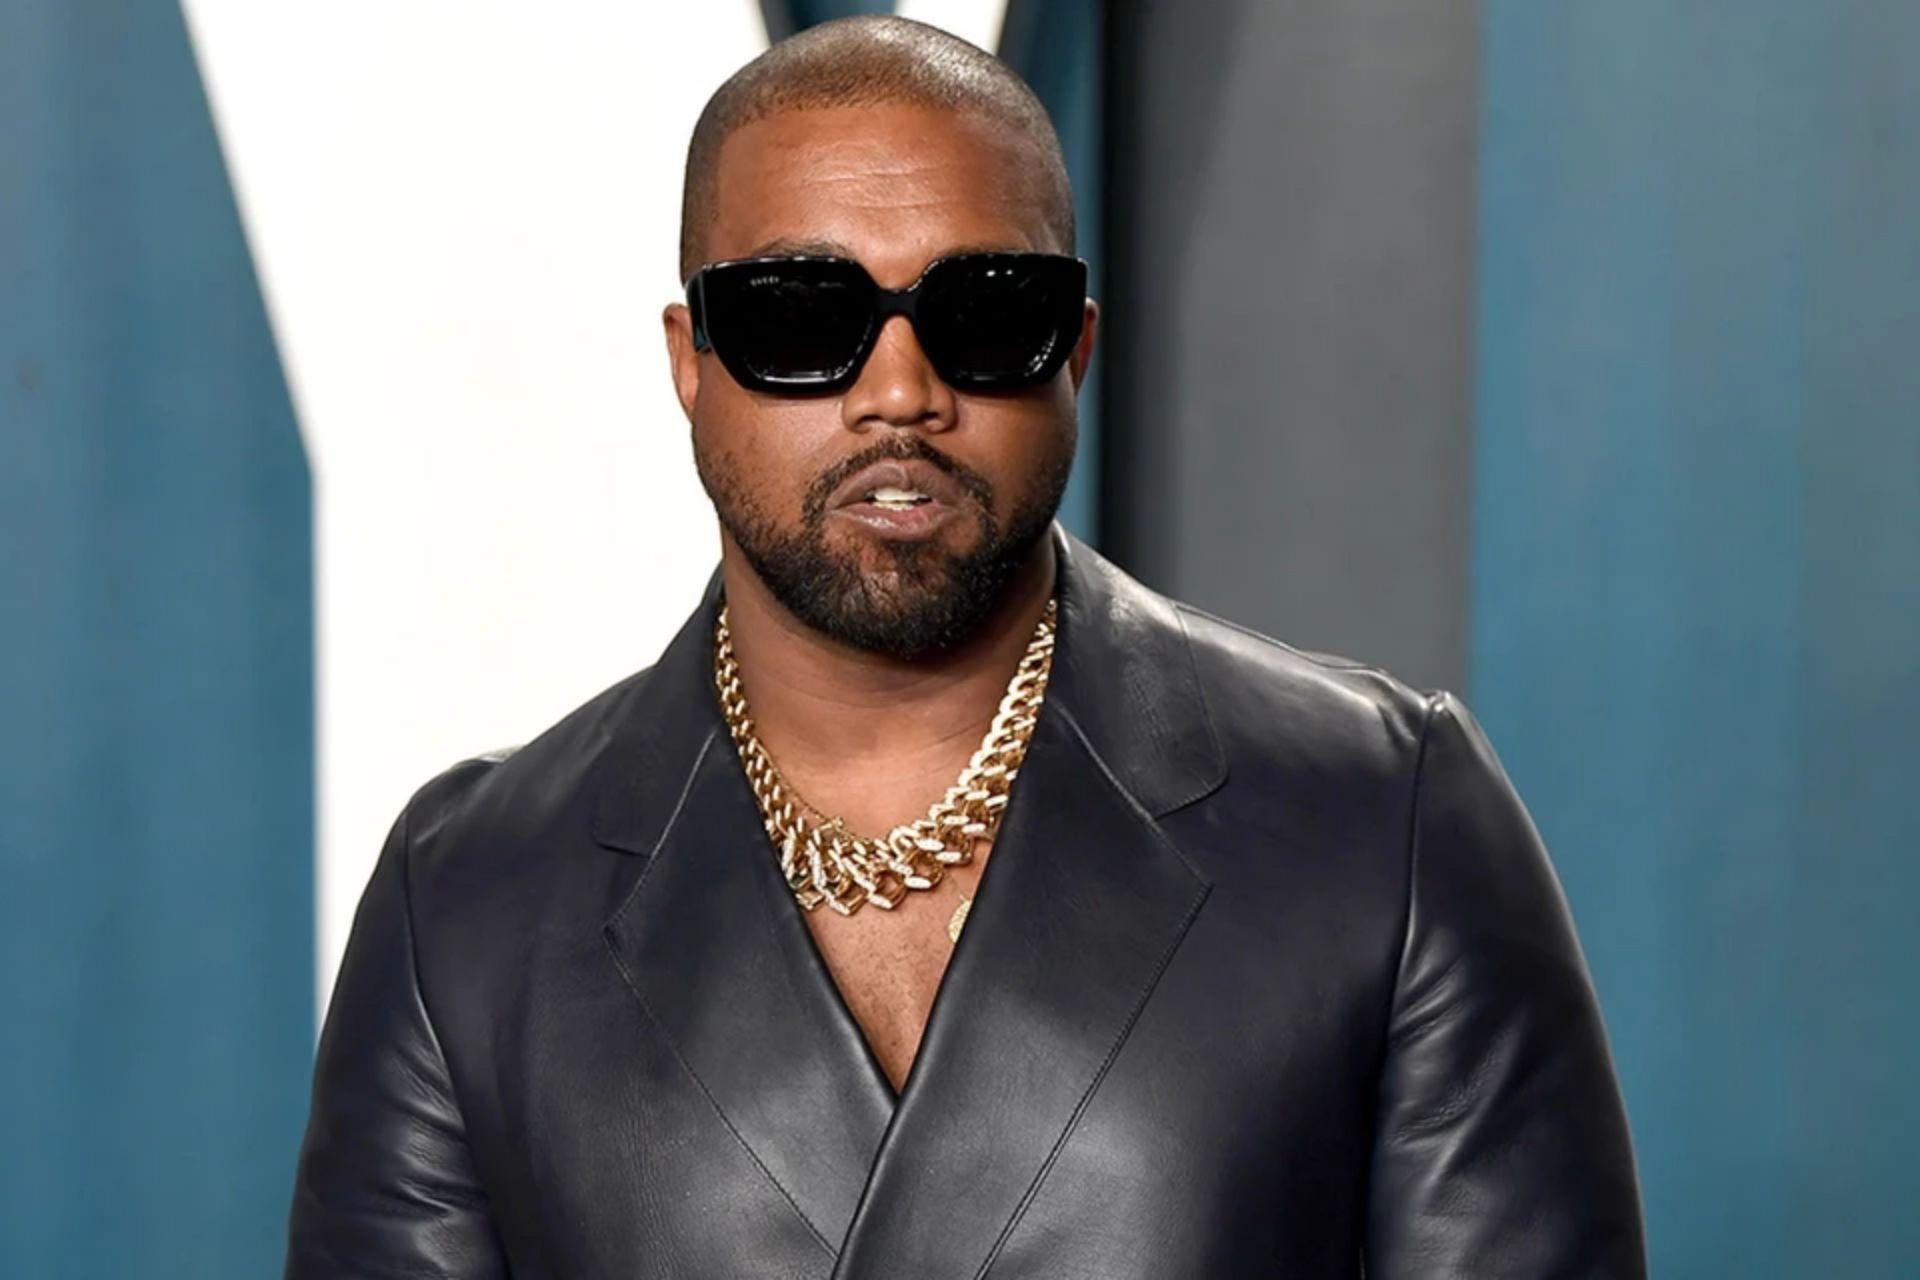 US 2020: Kanye West joins presidential race